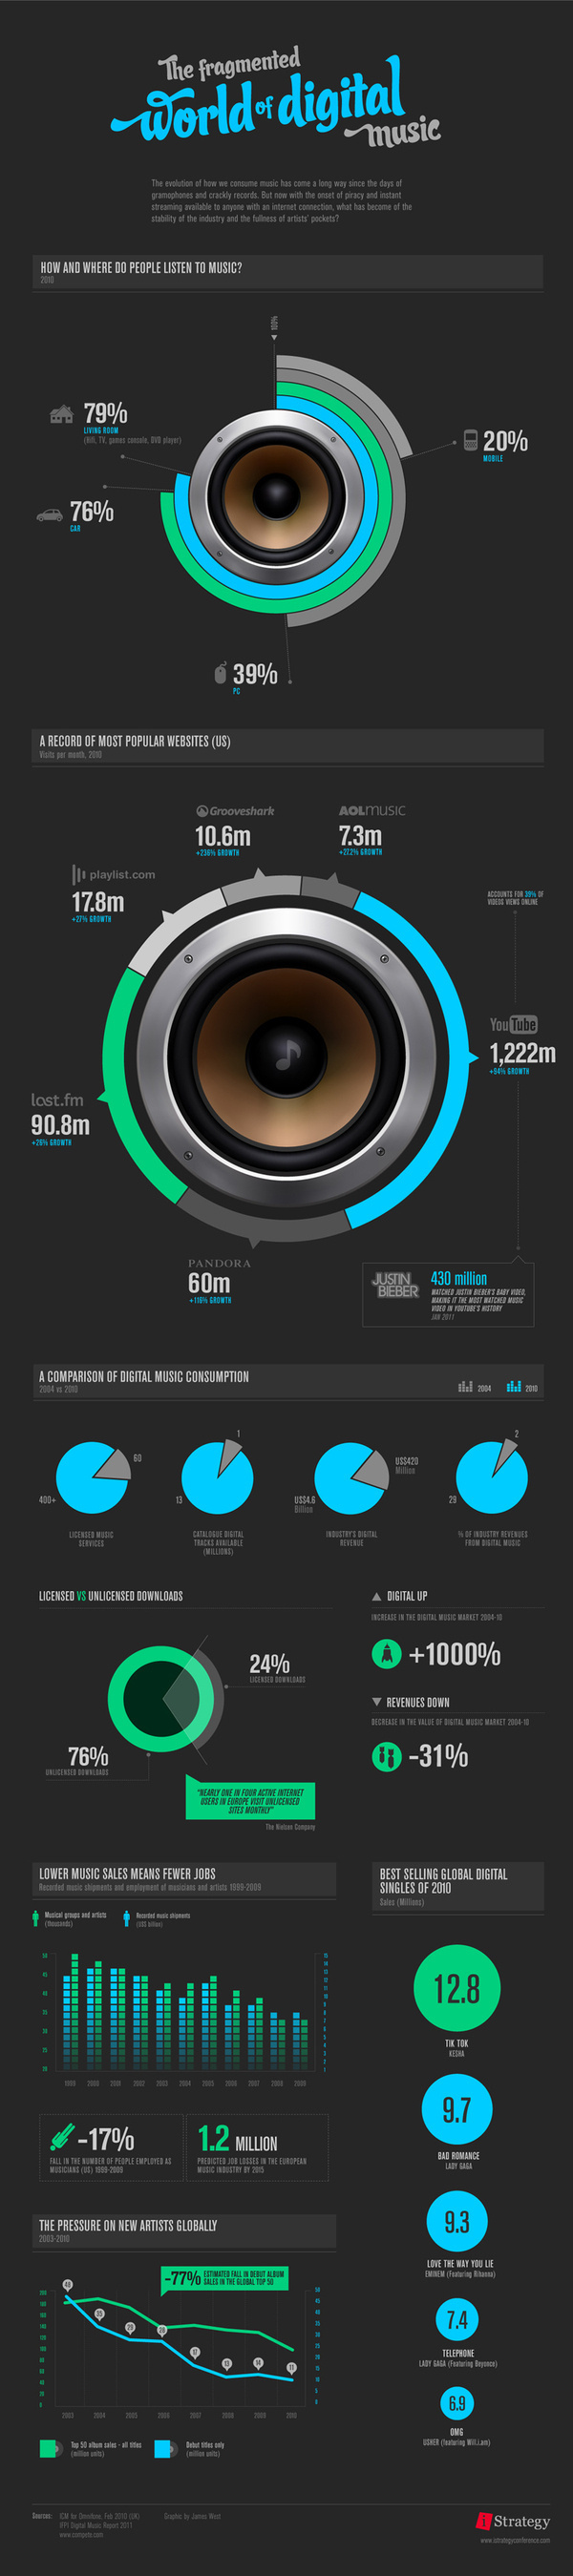 Infographic design idea #346: The Fragmented World of Digital Music - INFOGRAPHIC #music #digital #infographic